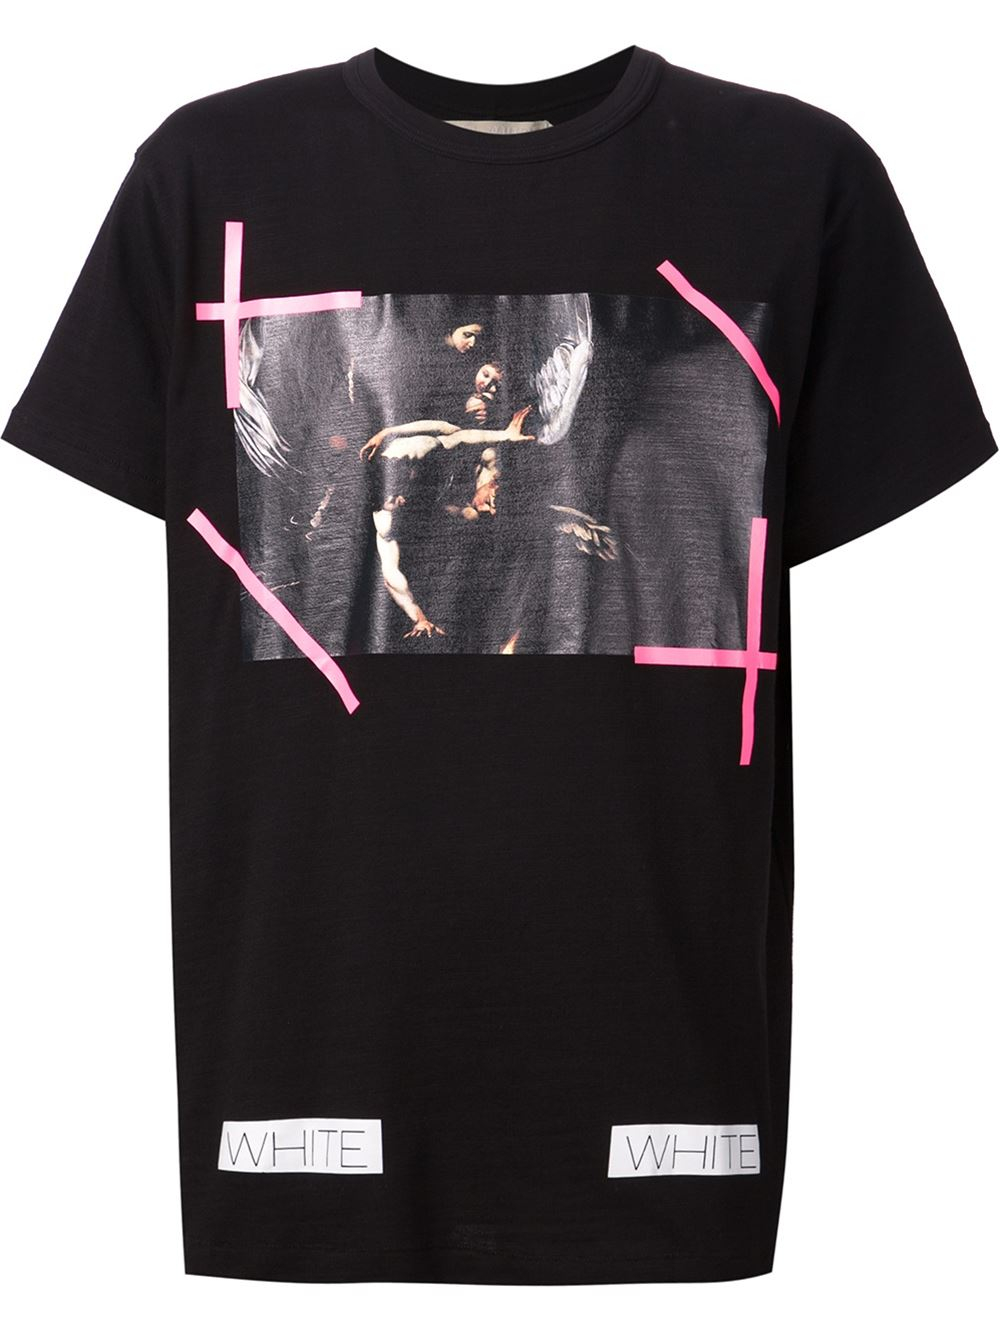 Off-White c/o Virgil Abloh New Caravaggio Cotton T-shirt in Black for